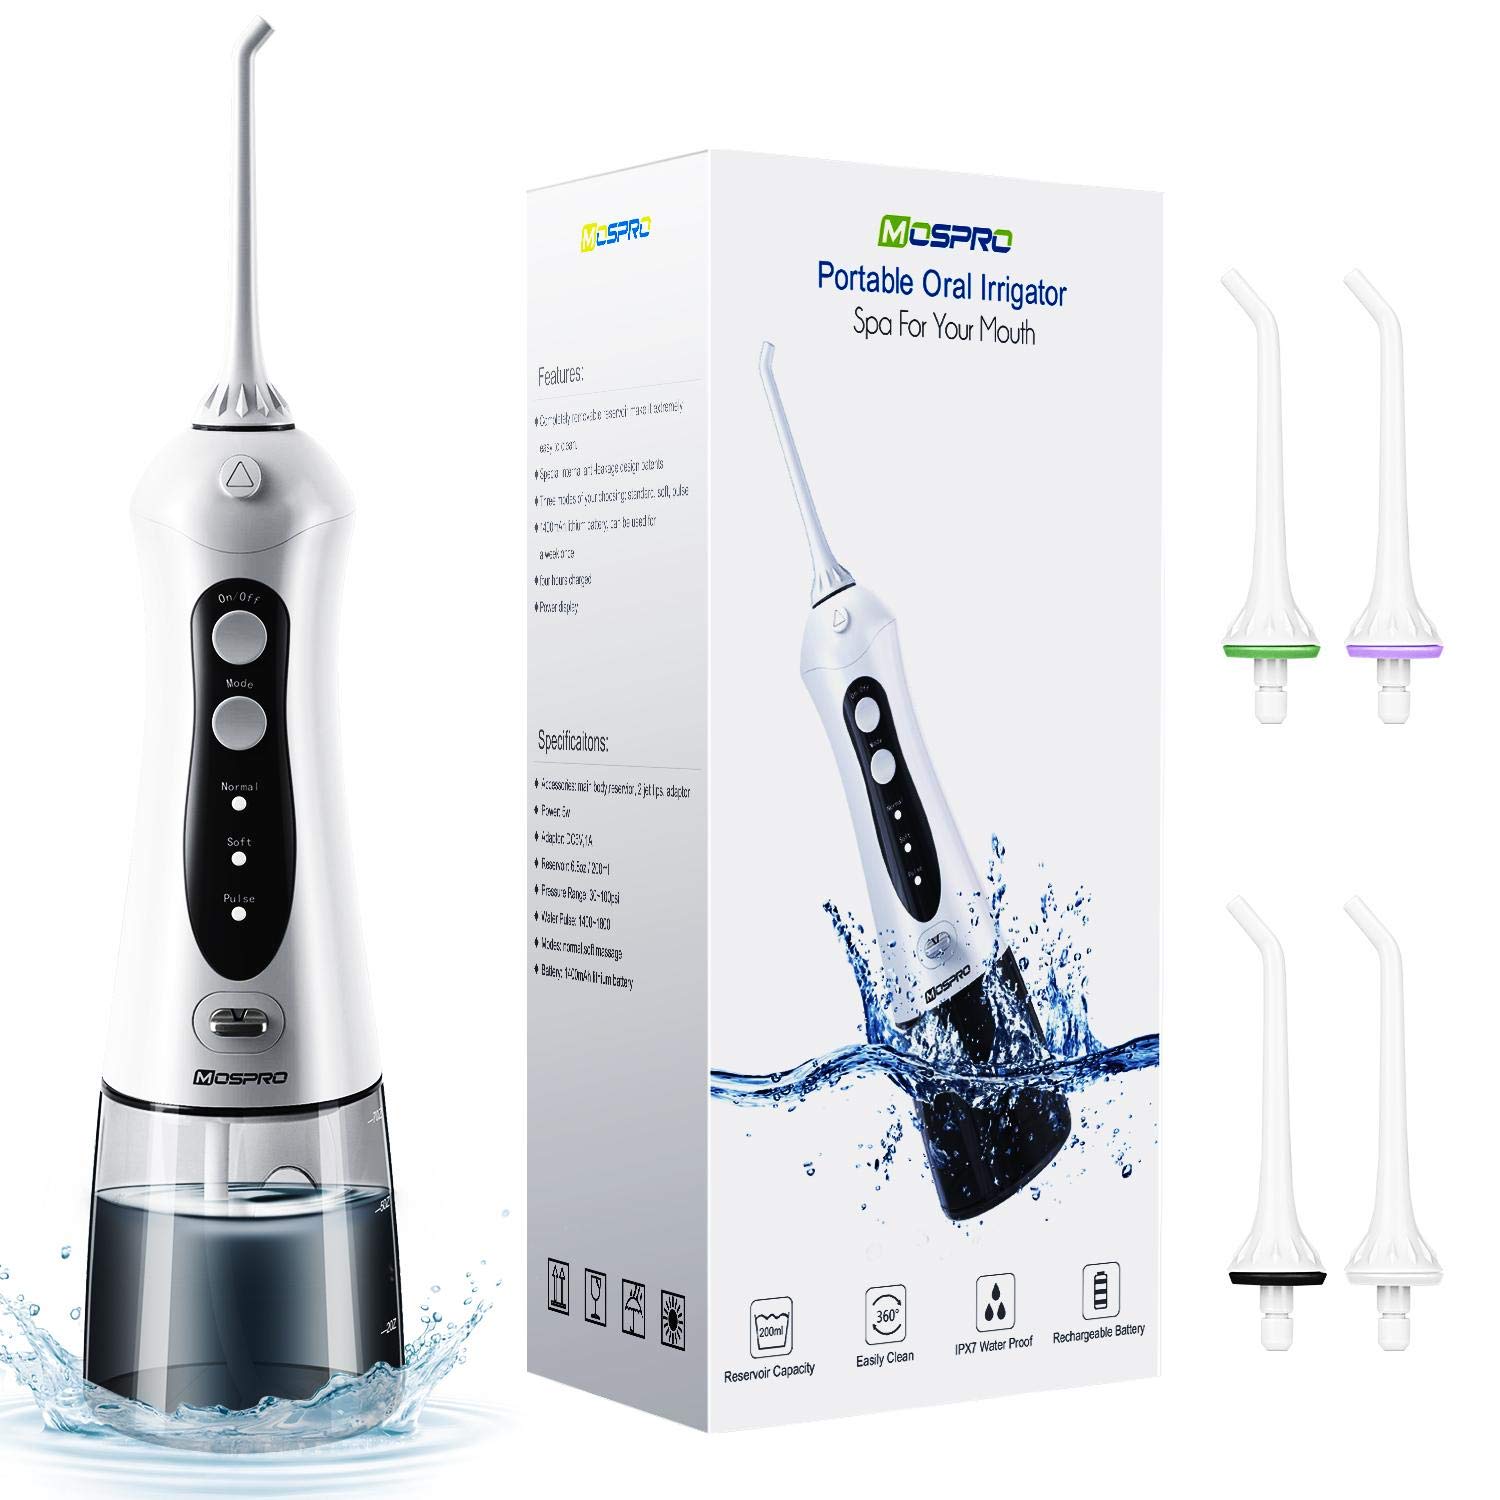 Water Flosser Professional Cordless Dental Oral Irrigator - 300ML Portable and Rechargeable IPX7 Waterproof Water Flosser for Home and Travel, Braces & Bridges Care, 3 Modes Water Sprays for Teeth